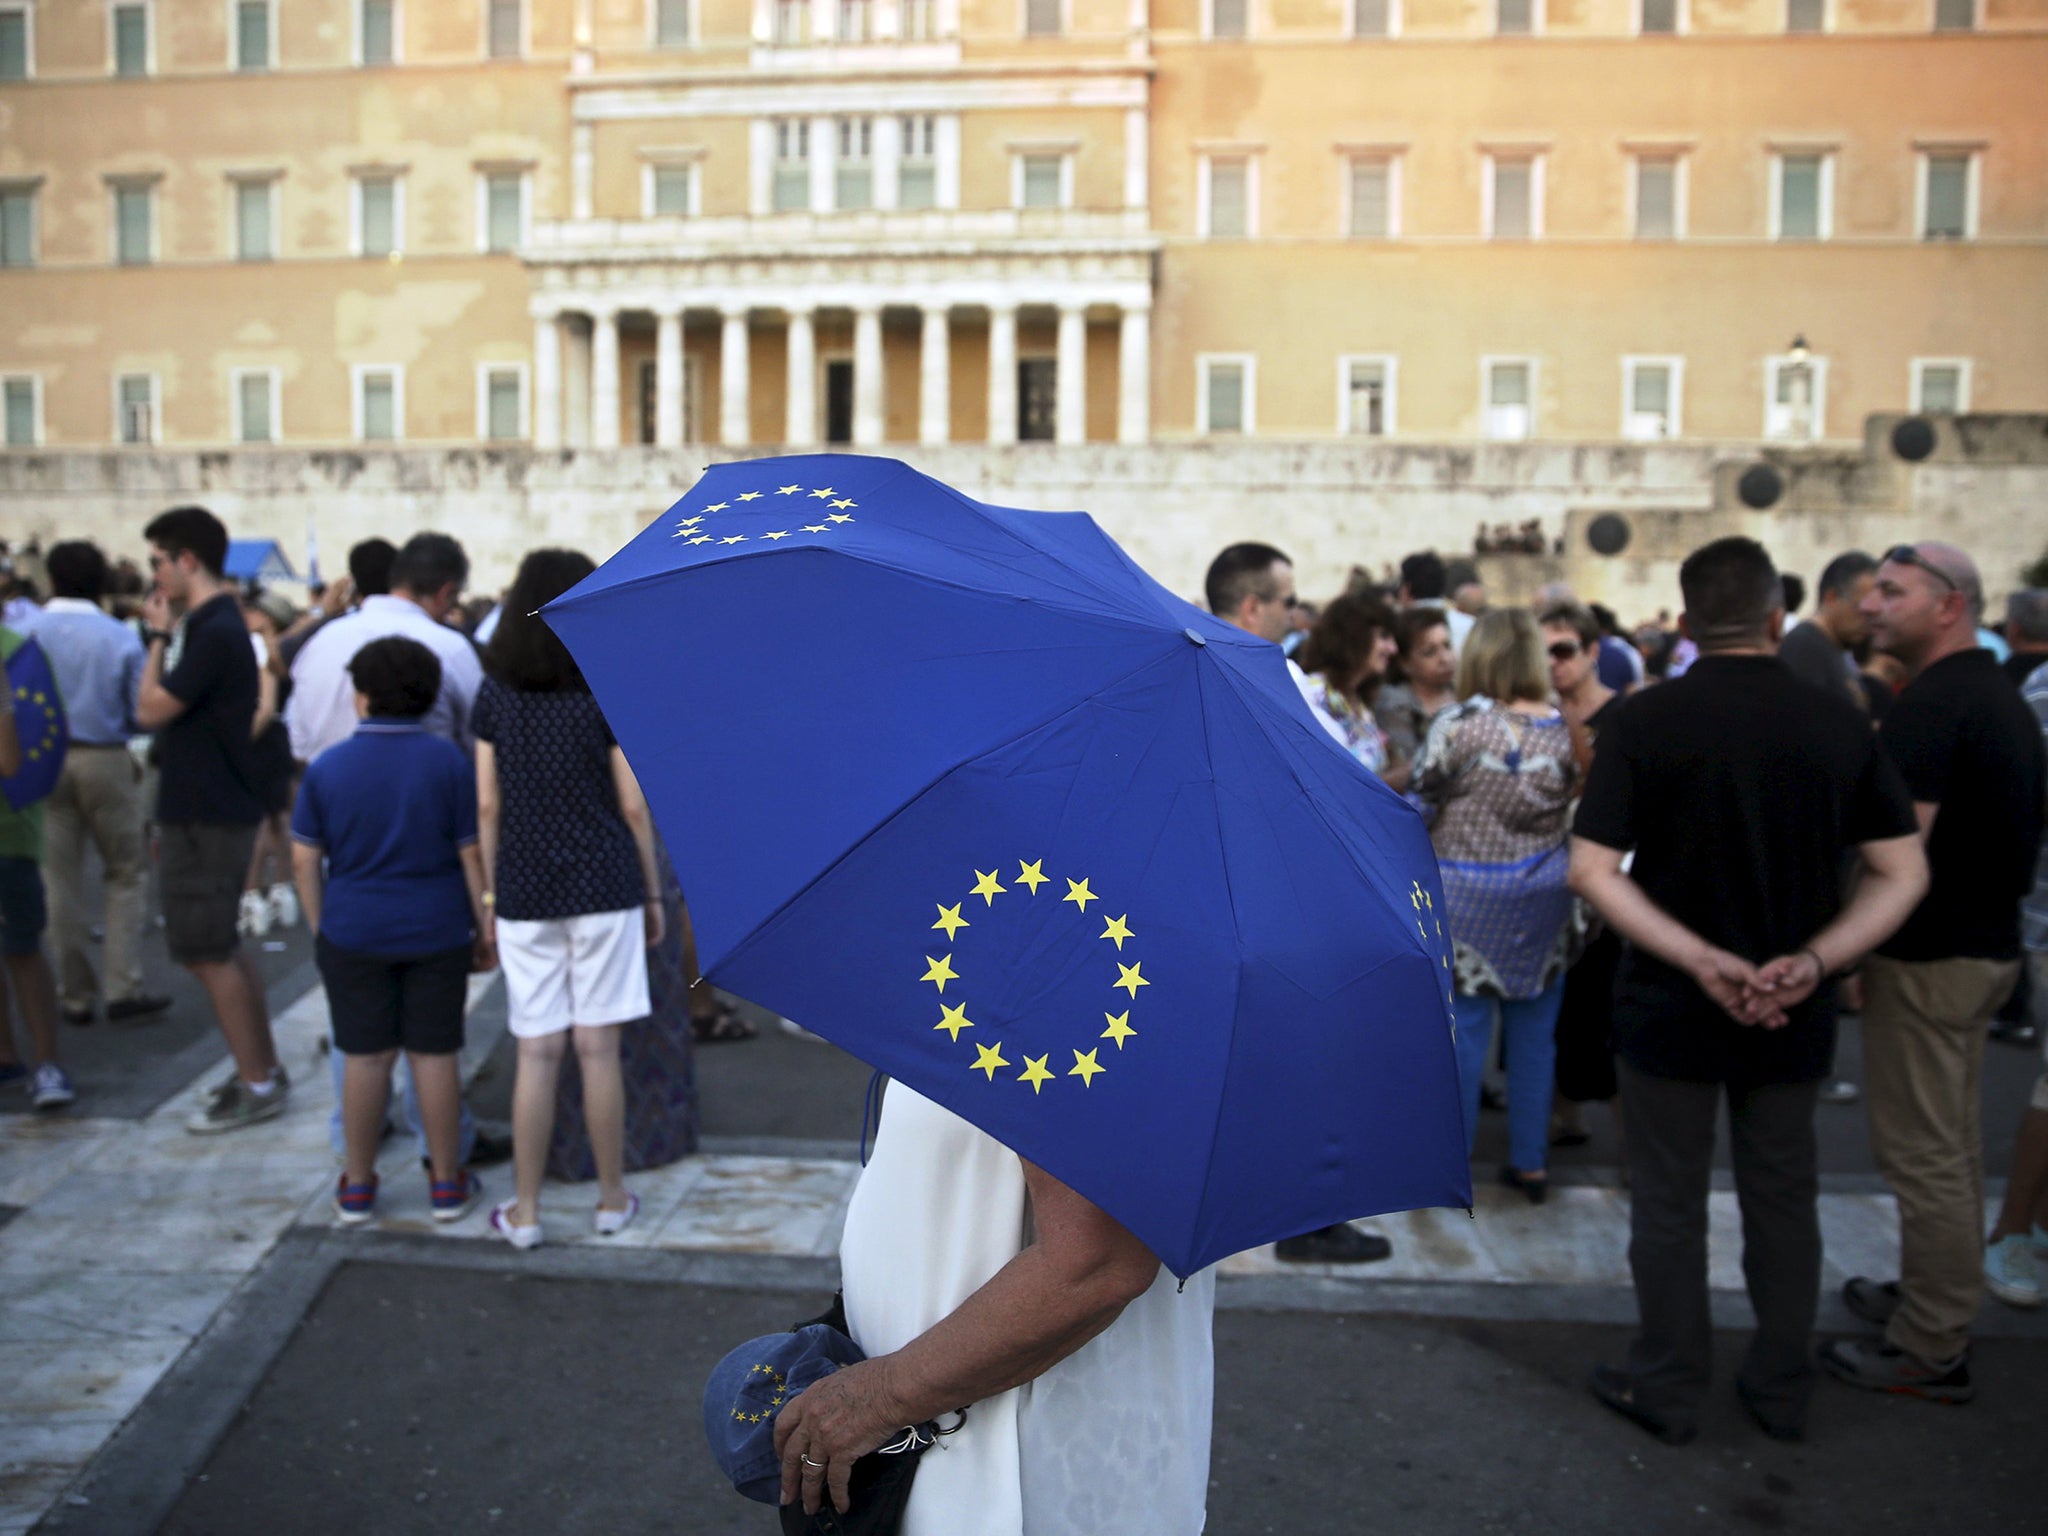 A pro-Euro protester holds an umbrella with the European Union symbol during a rally in front of the parliament building in Athens